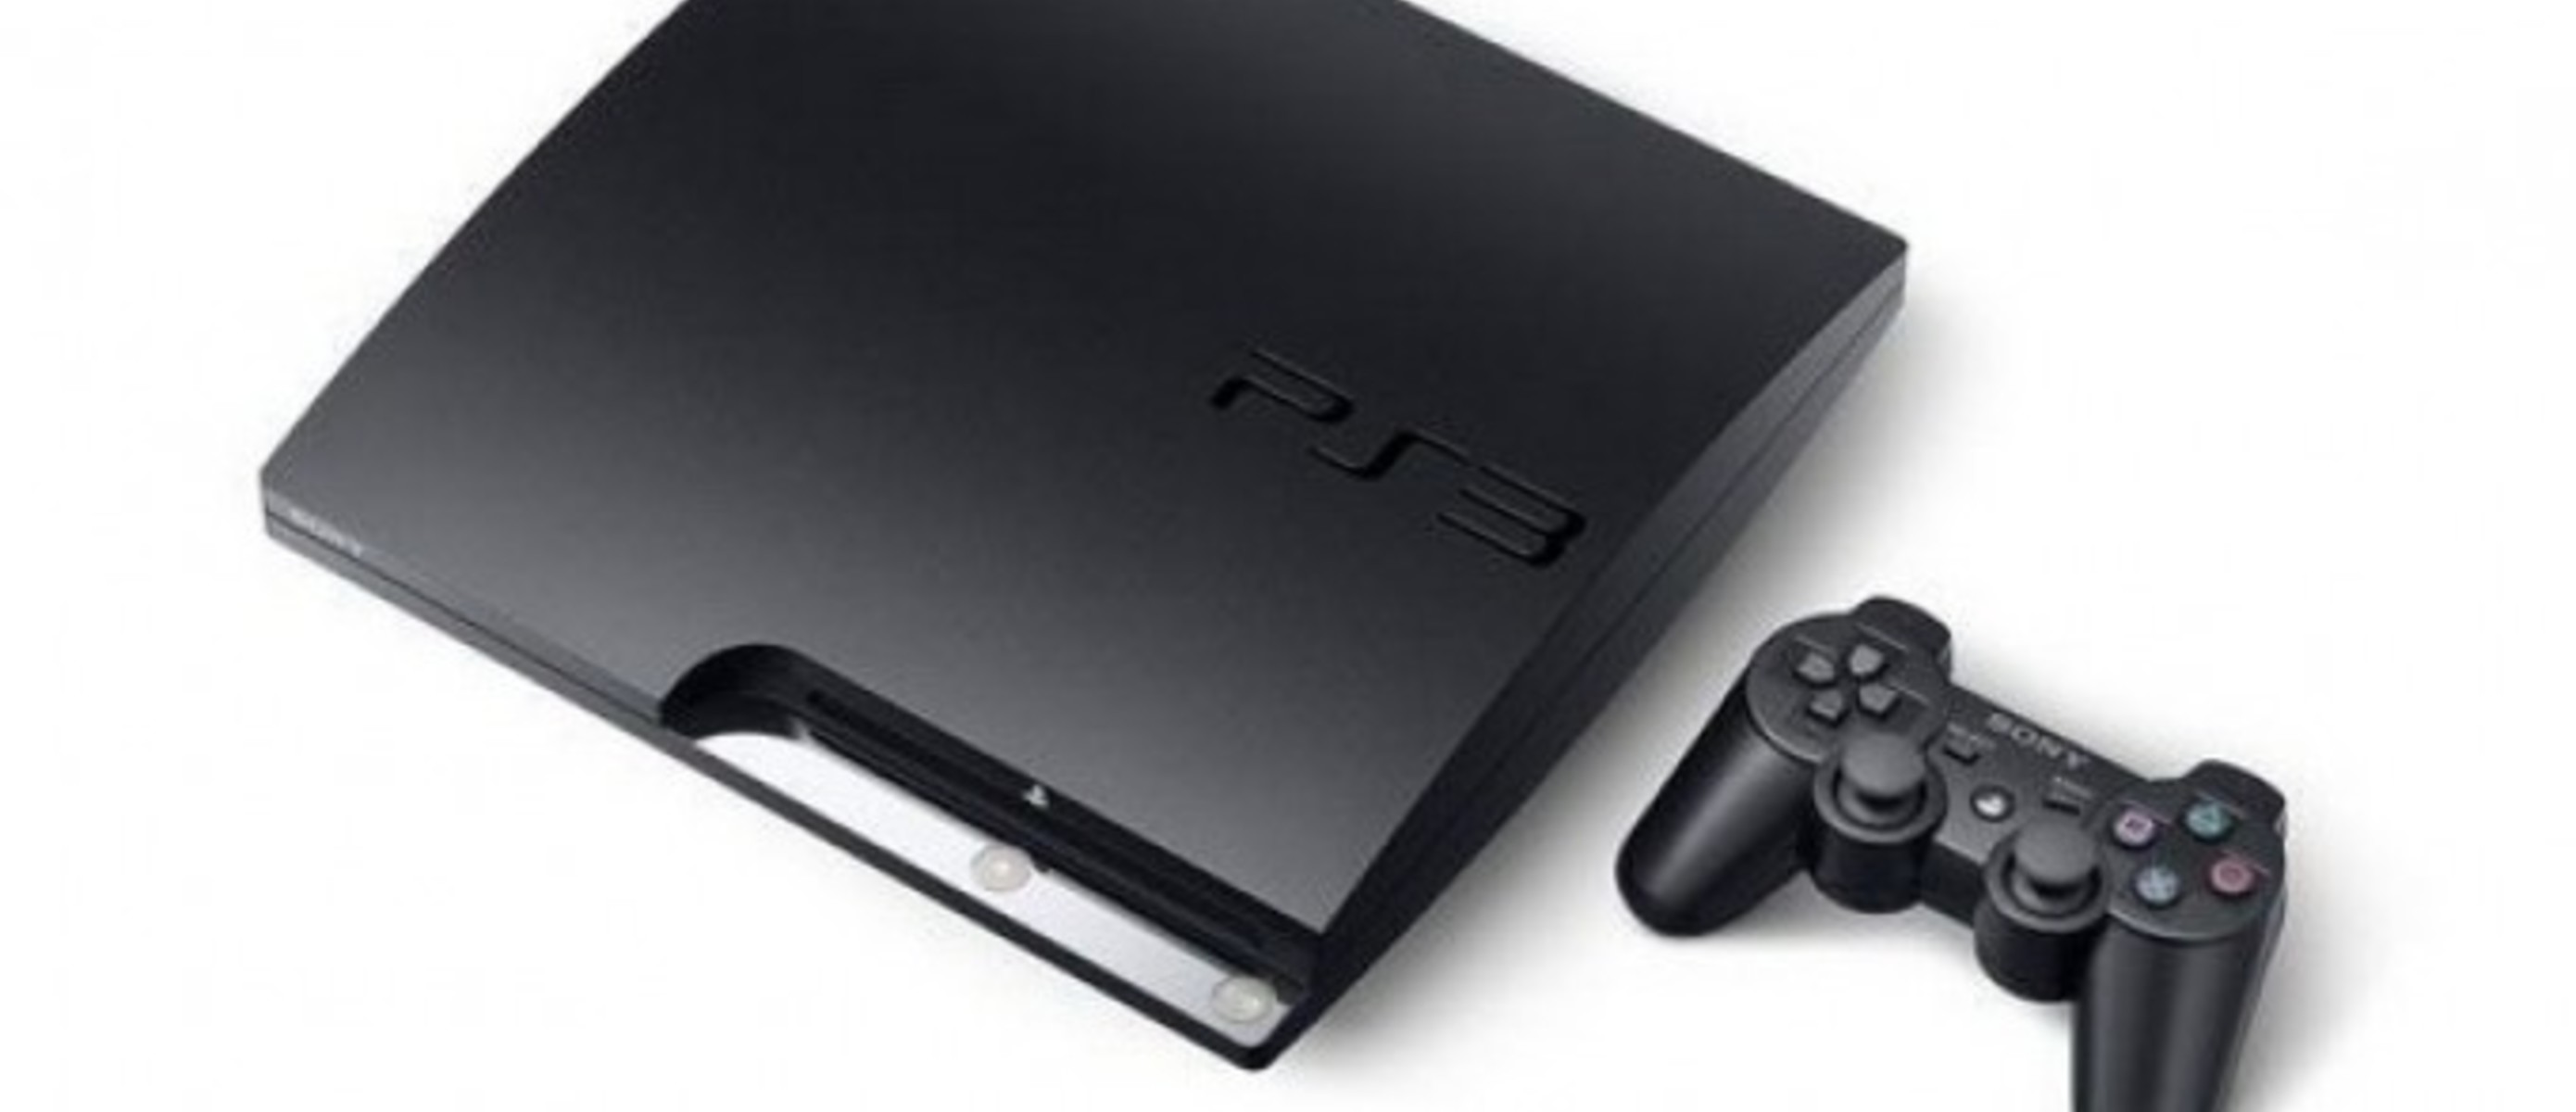 New ps3. Sony ps3. Sony ps3 Slim. Ps3 Slim 320gb. Ps3 3008b.